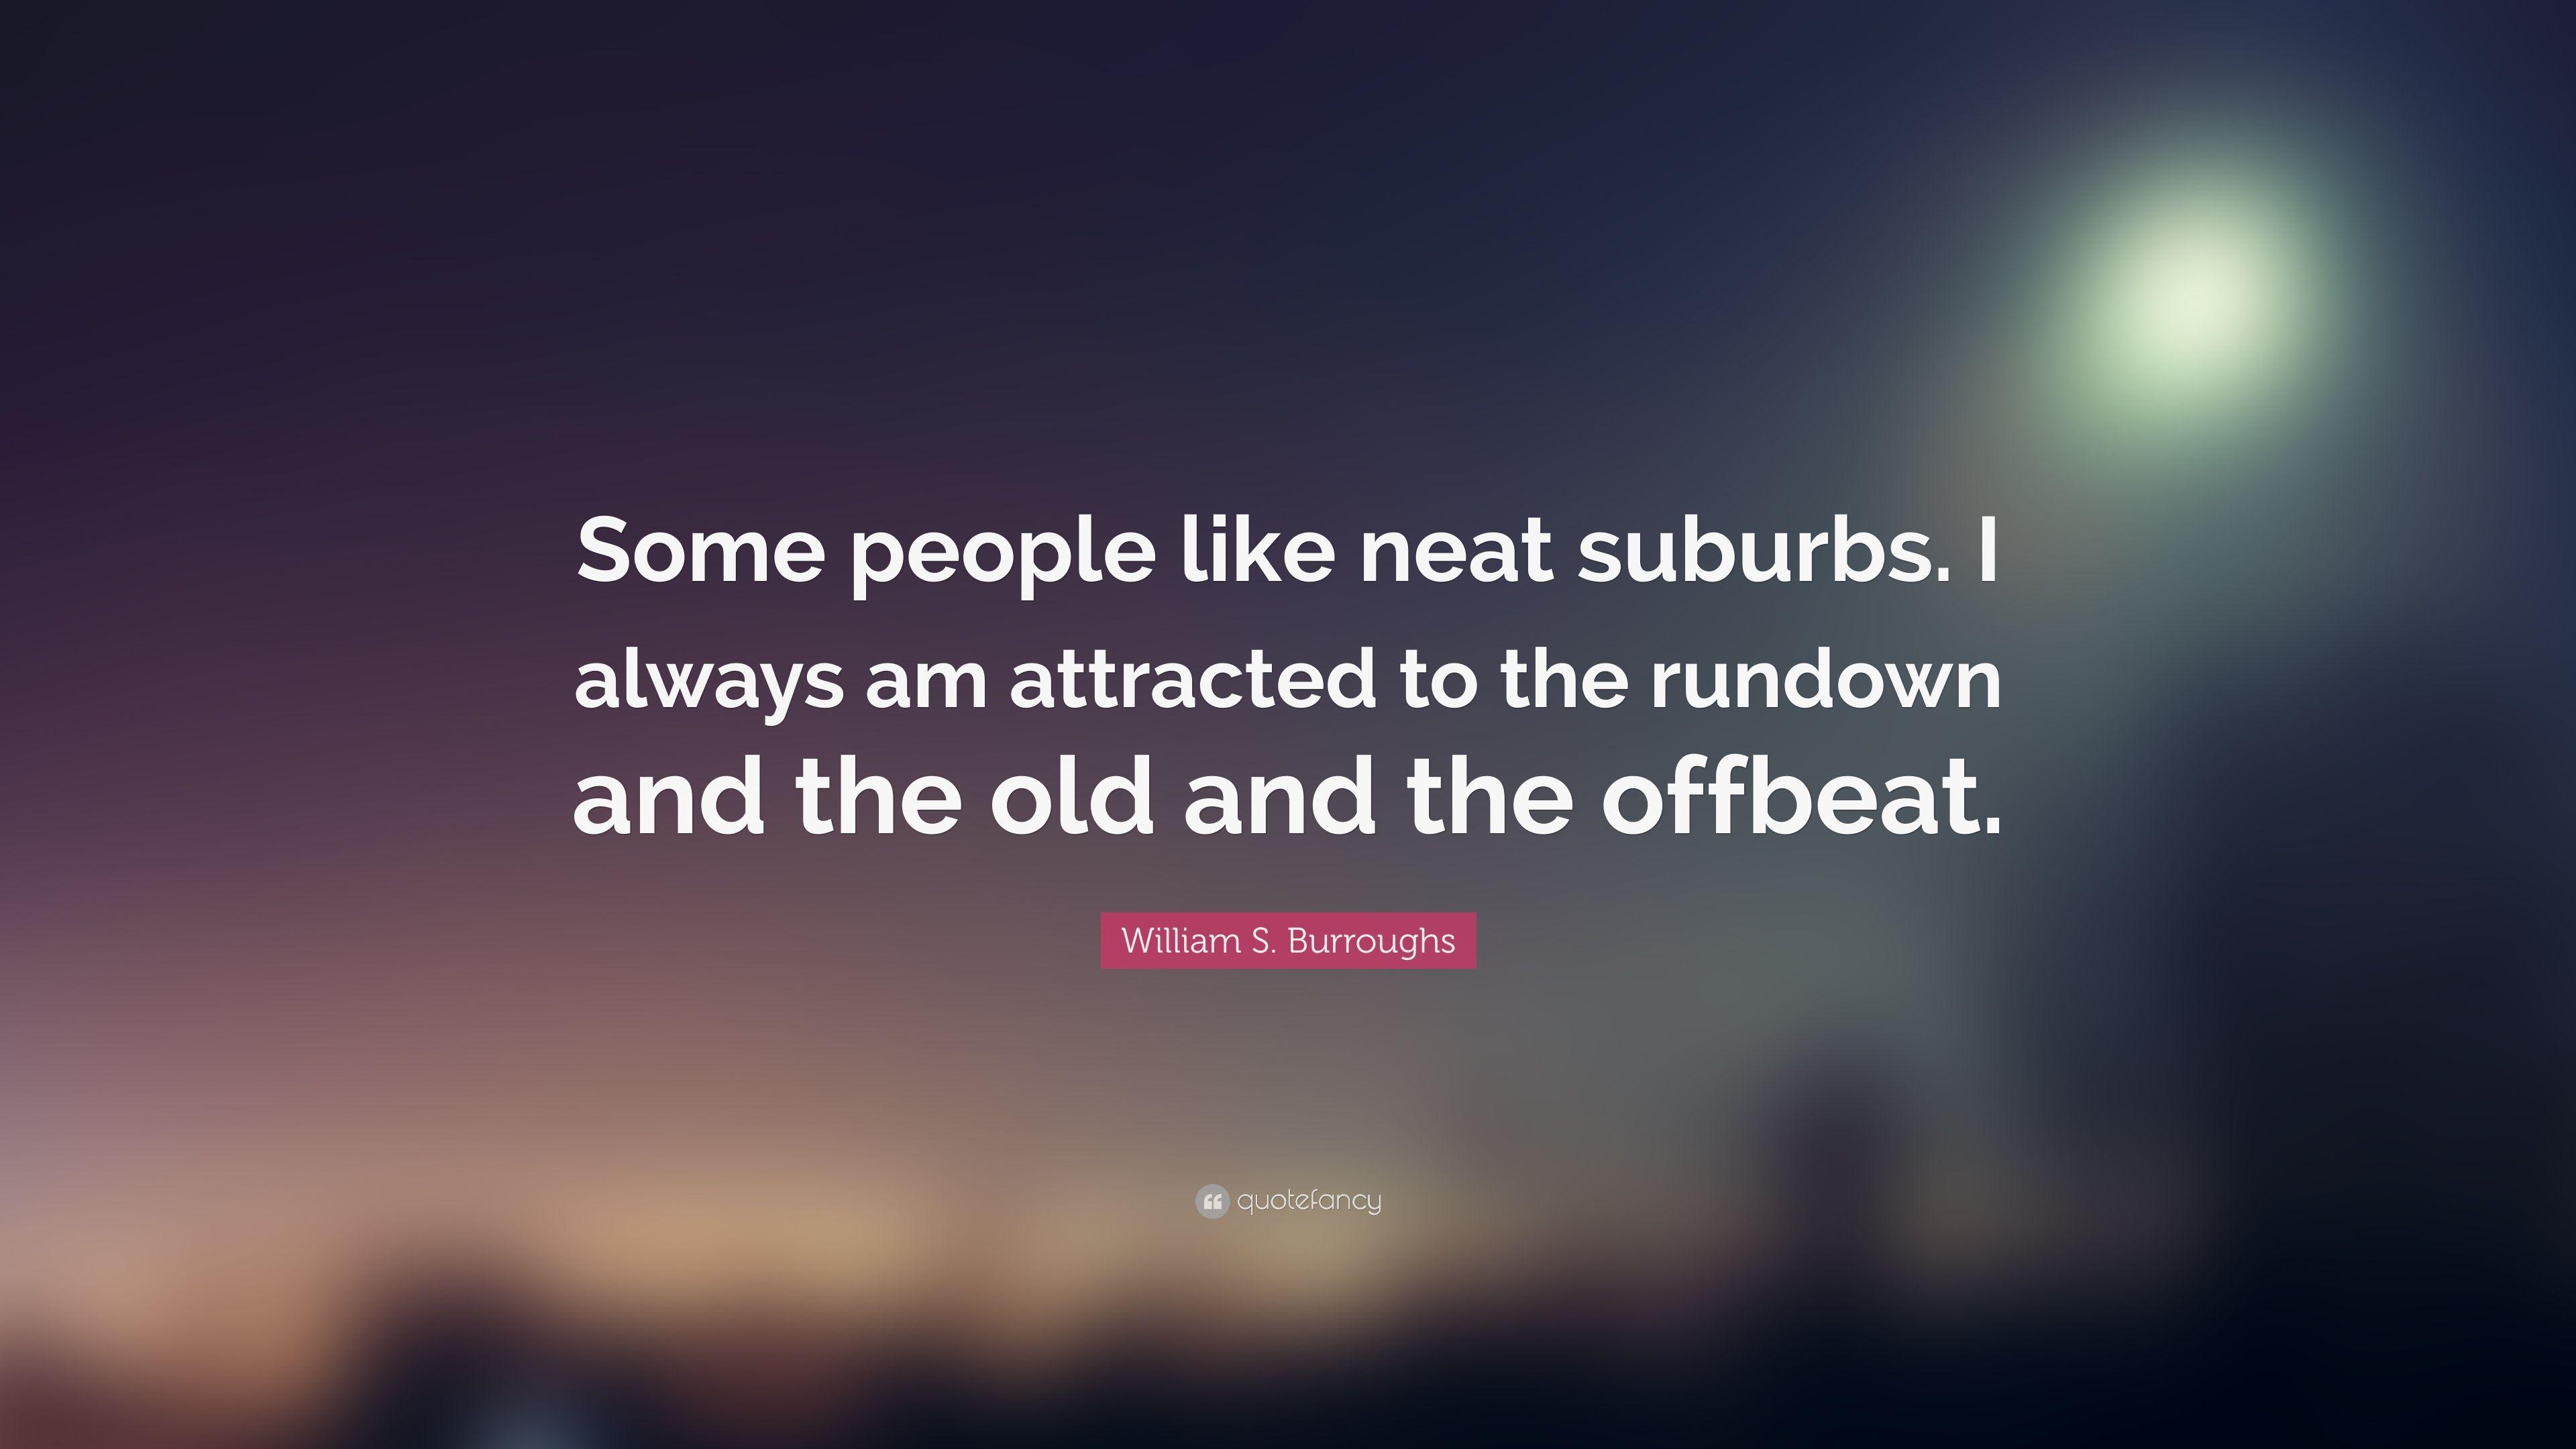 William S. Burroughs Quote: “Some people like neat suburbs. I